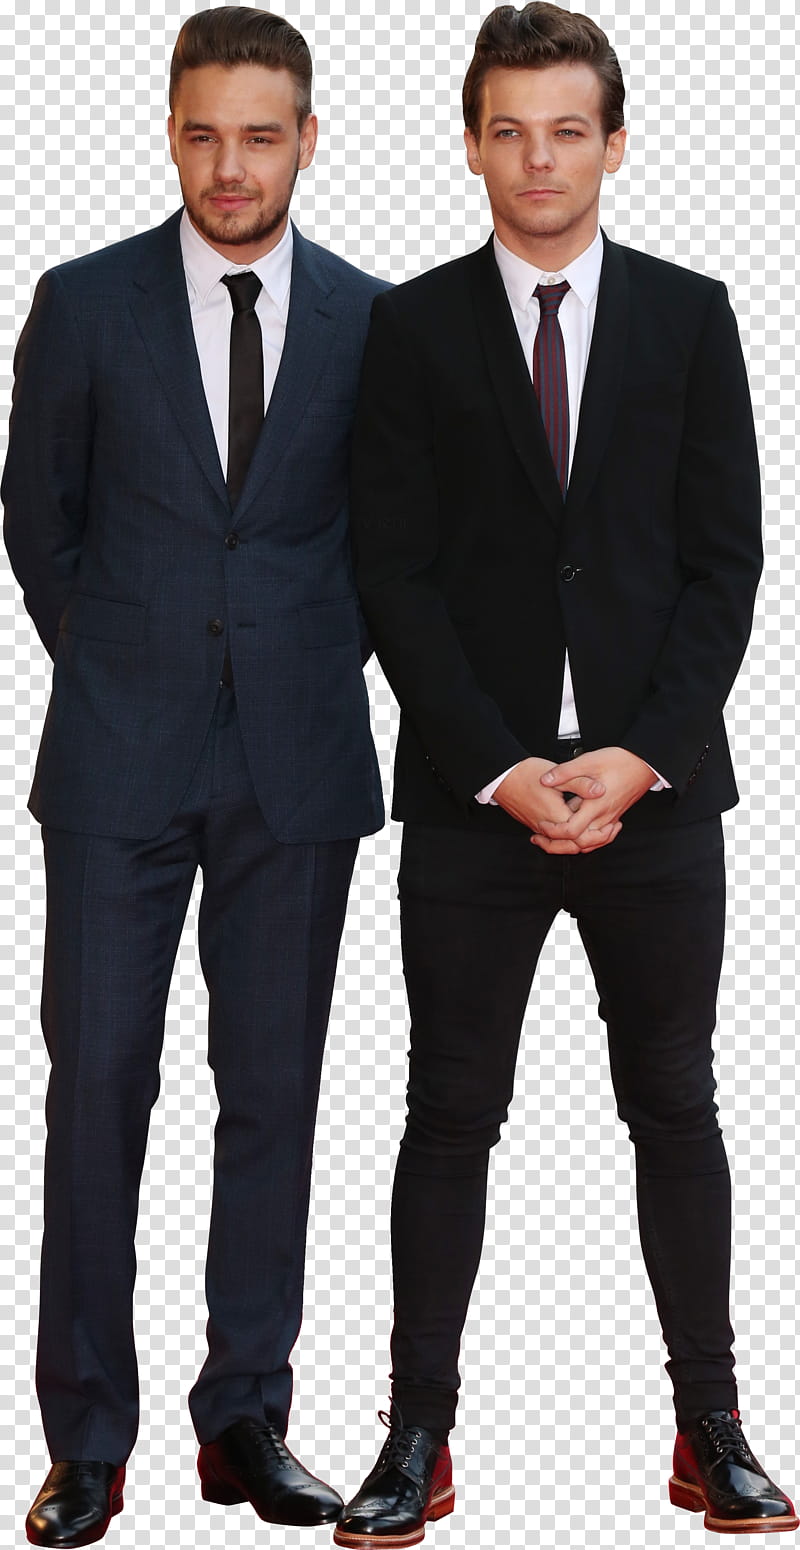 Luois Tomlinson And Liam Payne , two One Direction members standing in black suits transparent background PNG clipart